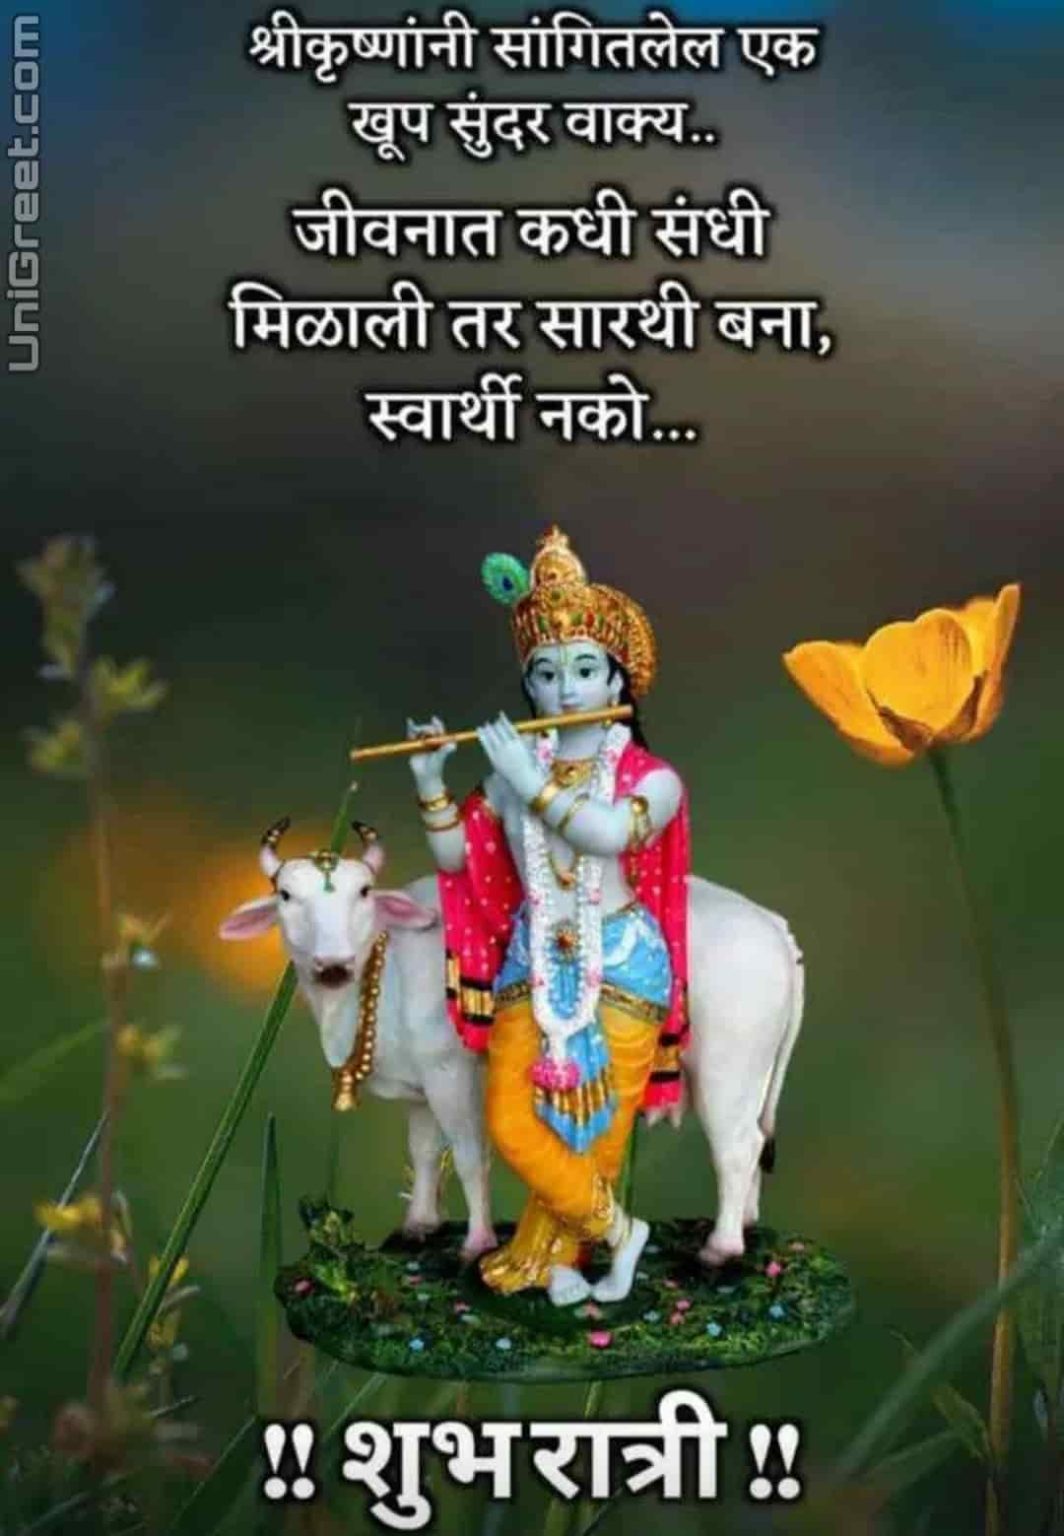 50+ शुभ रात्री मराठी शुभेच्छा | Good Night Wishes Images Quotes Status